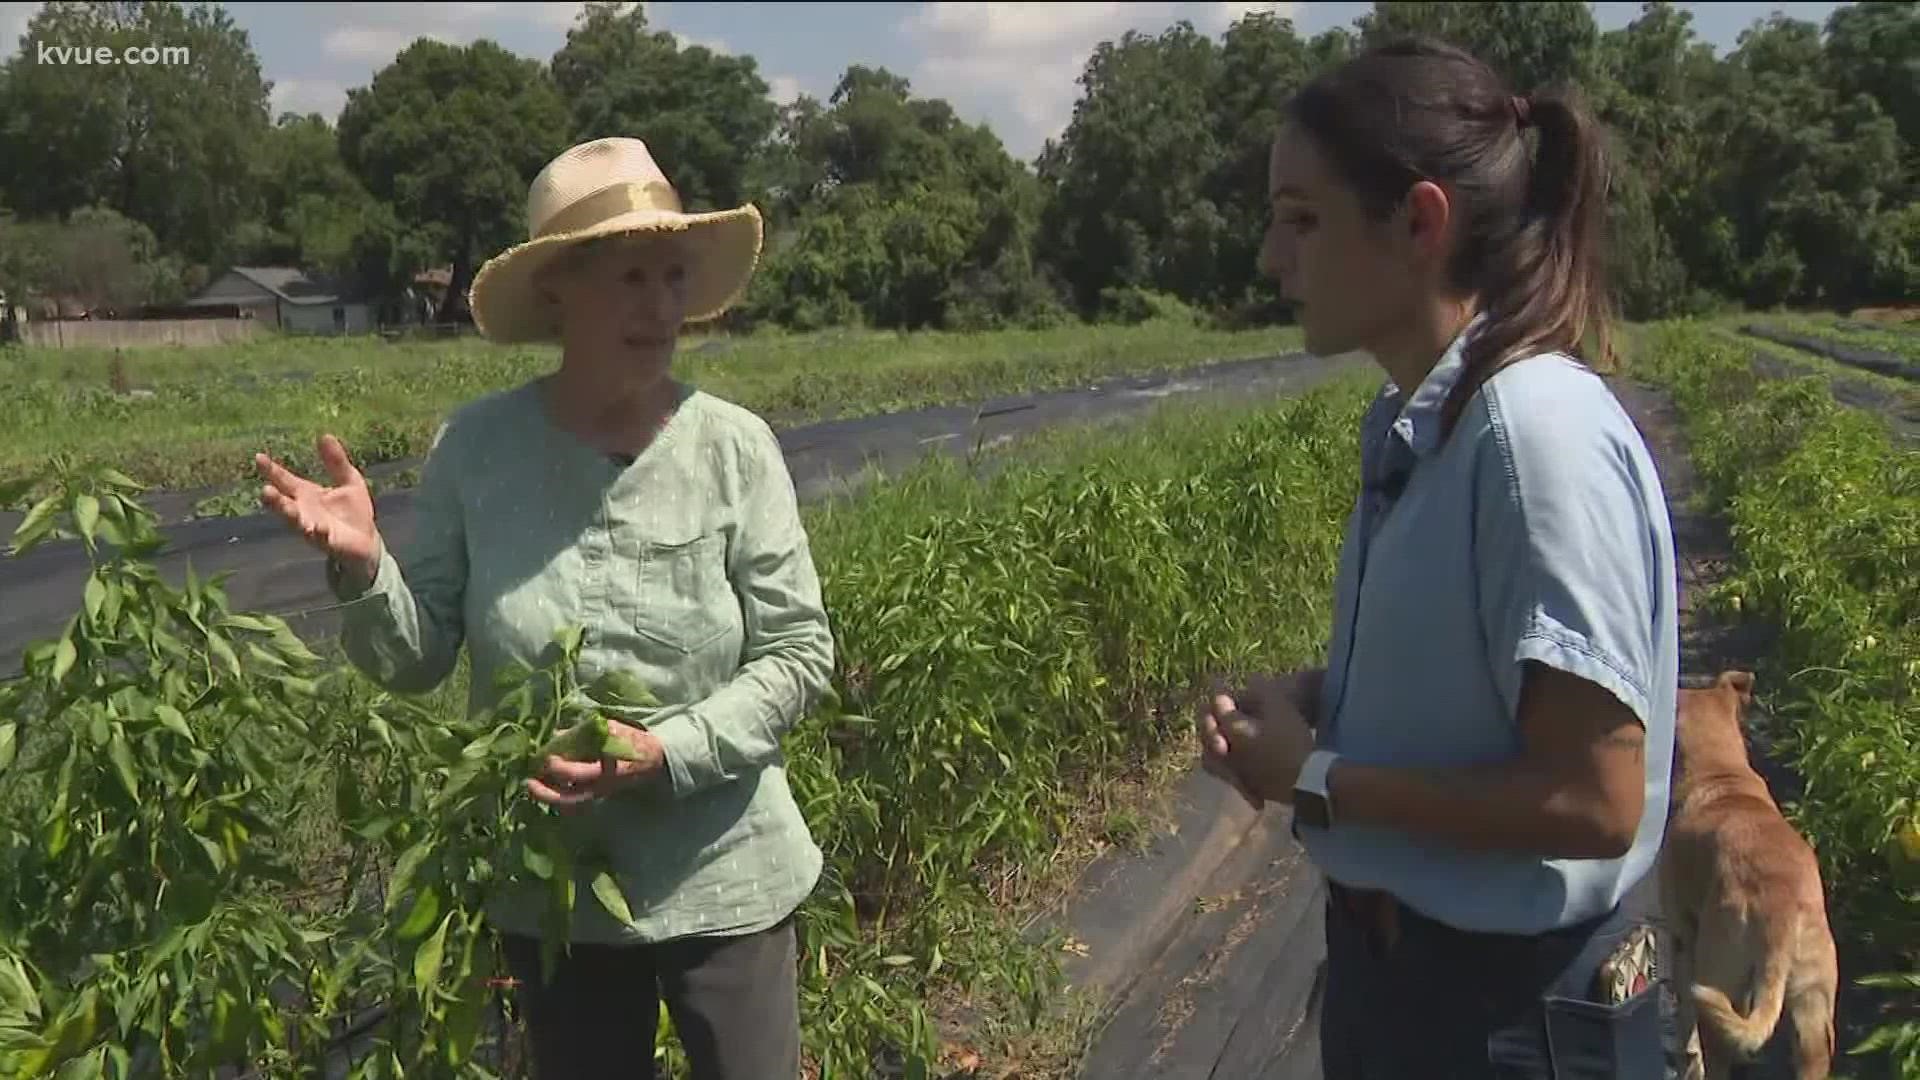 For this edition of Keep Austin Local, we visit Boggy Creek urban farm in East Austin. Those looking for fresh produce are invited to visit!